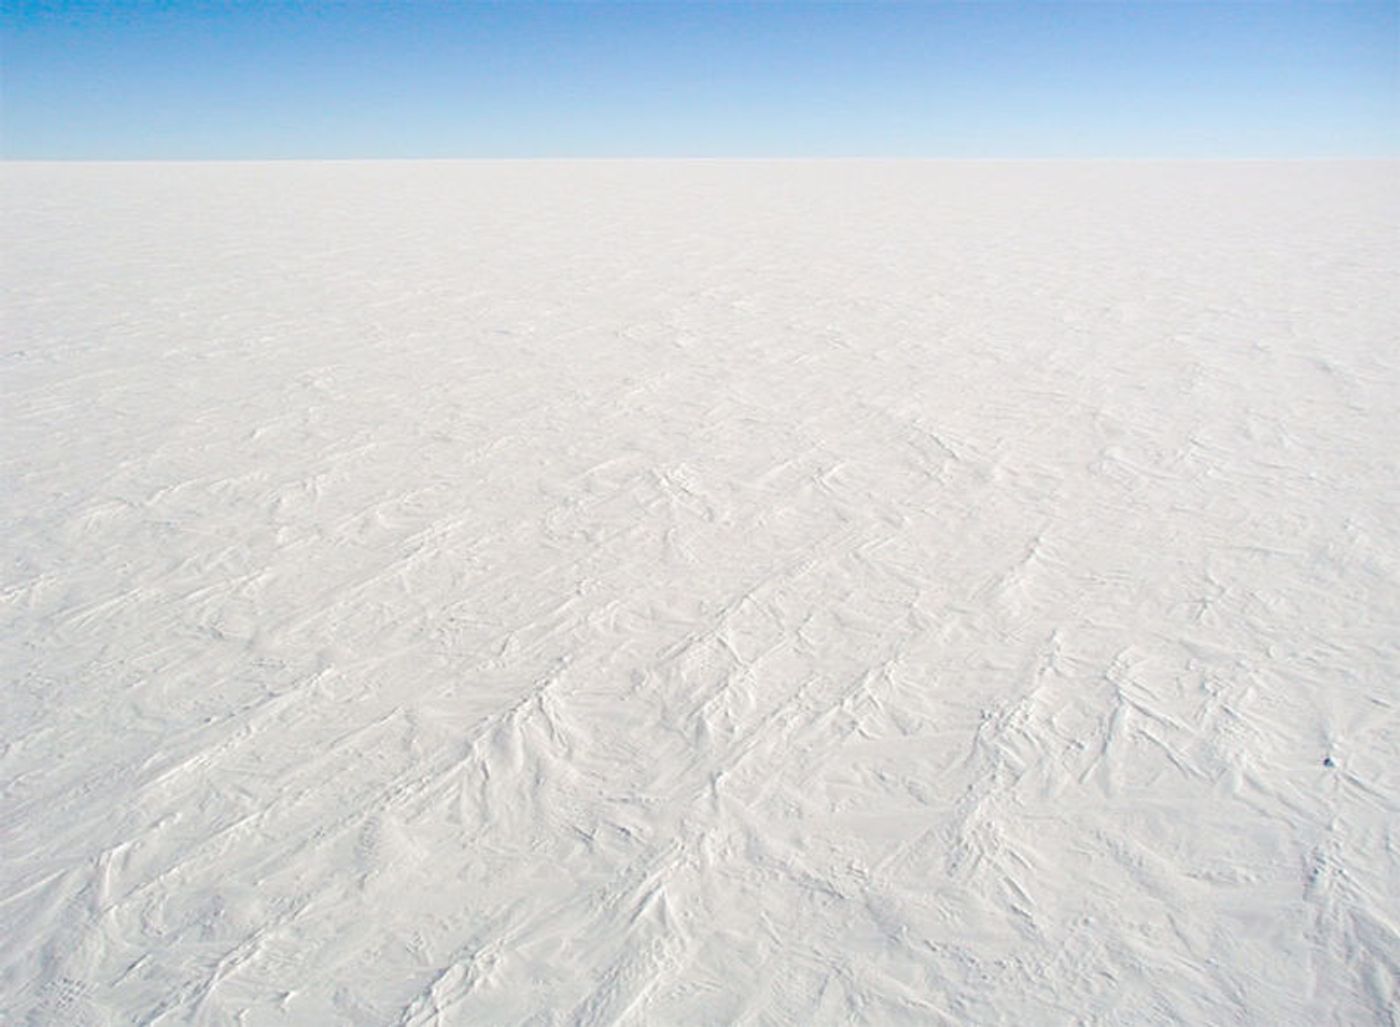 The Antarctic plateau where Dome C, the site of drilling, is situated.